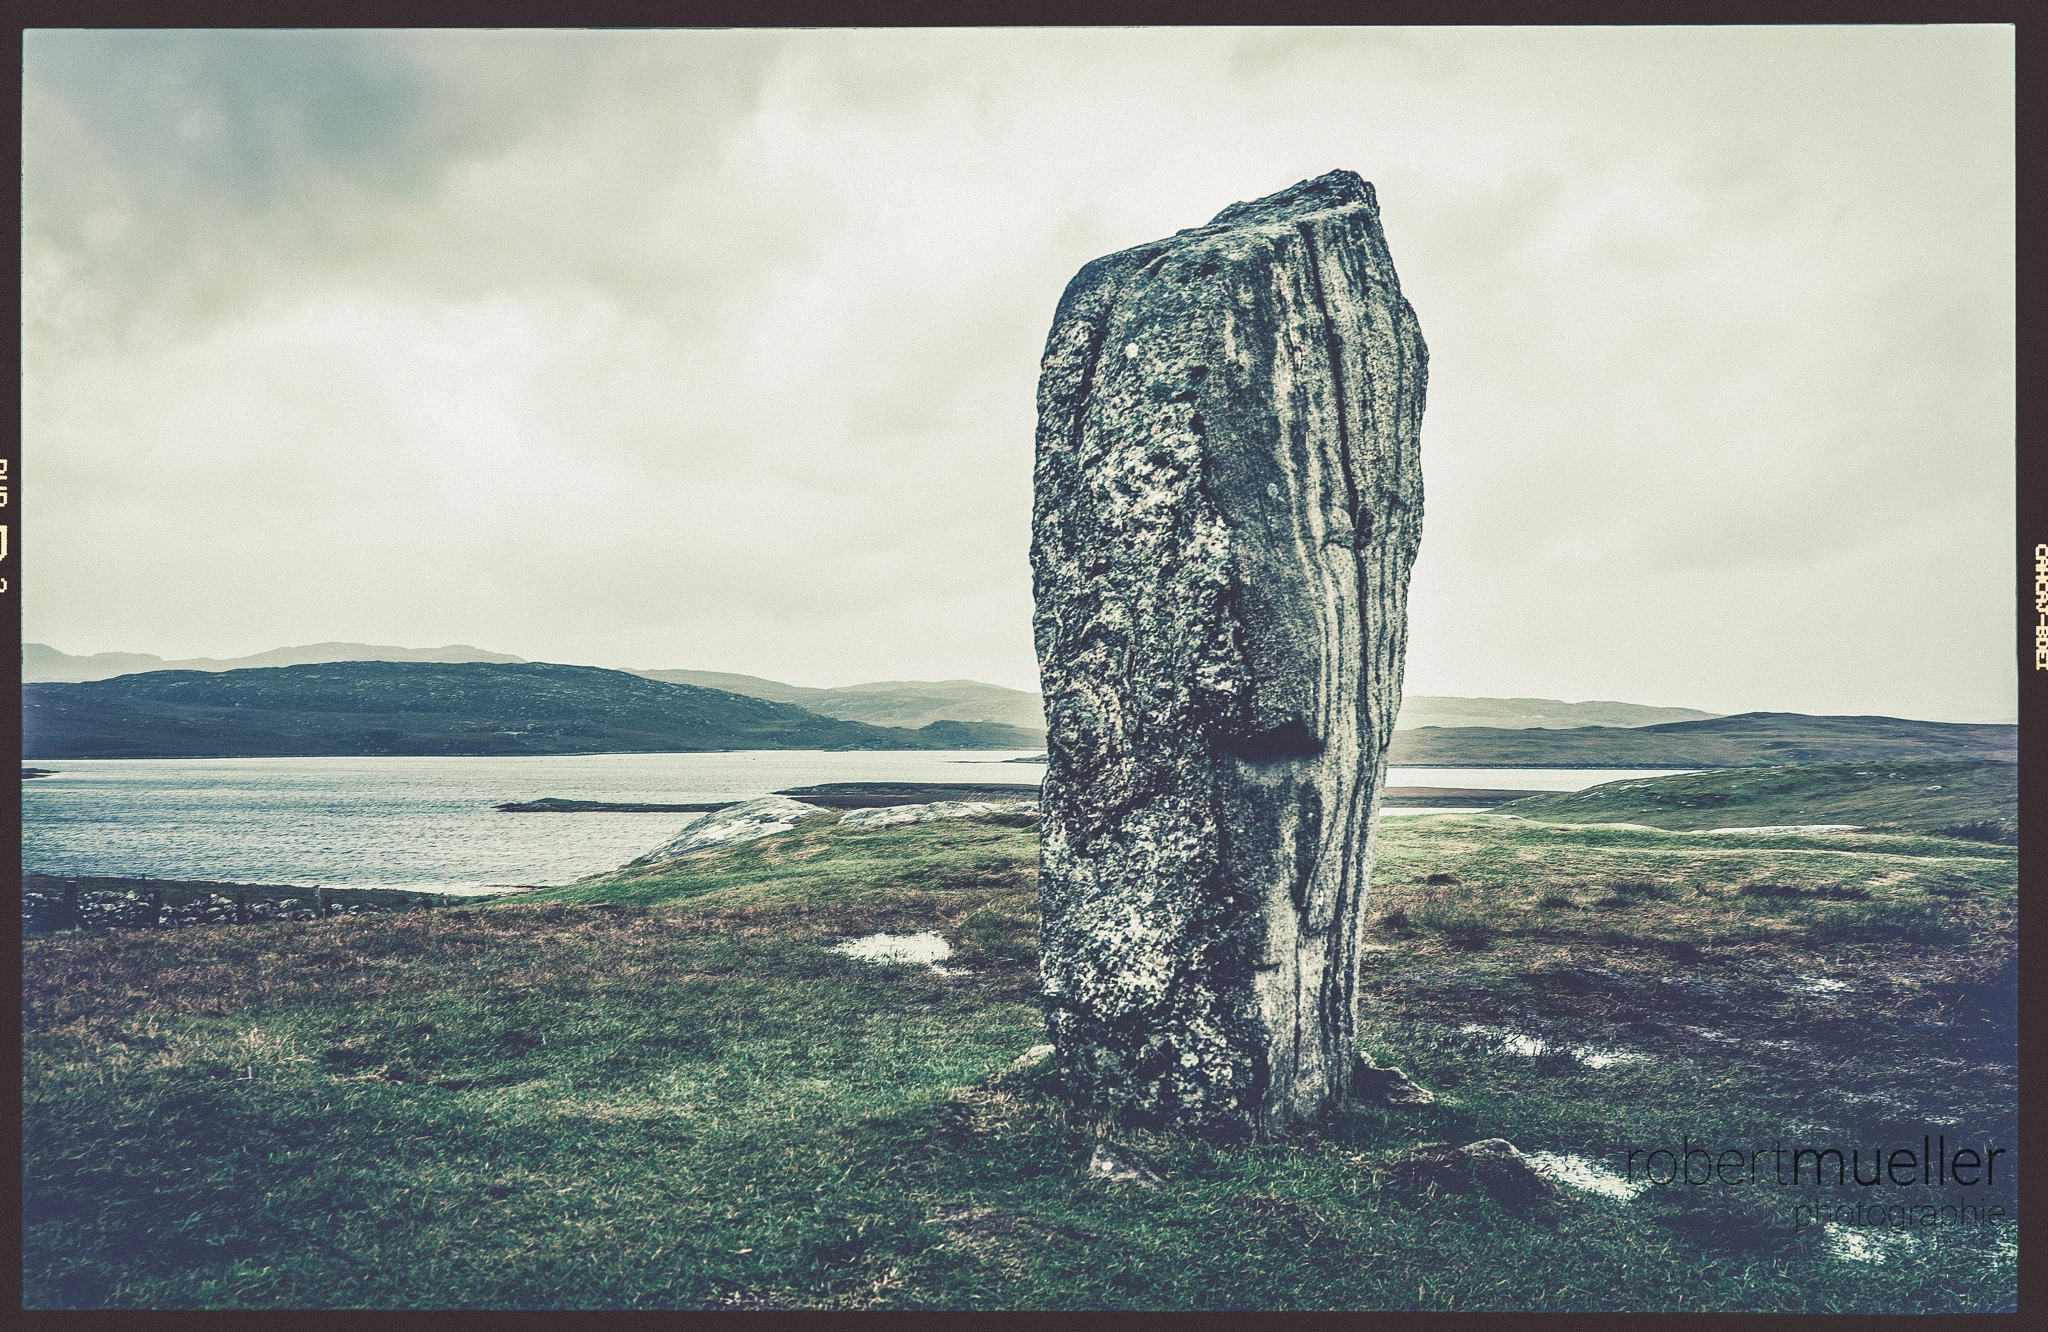 Sony FE PZ 28-135mm F4 G OSS sample photo. 5000 years - calanais standing stones photography